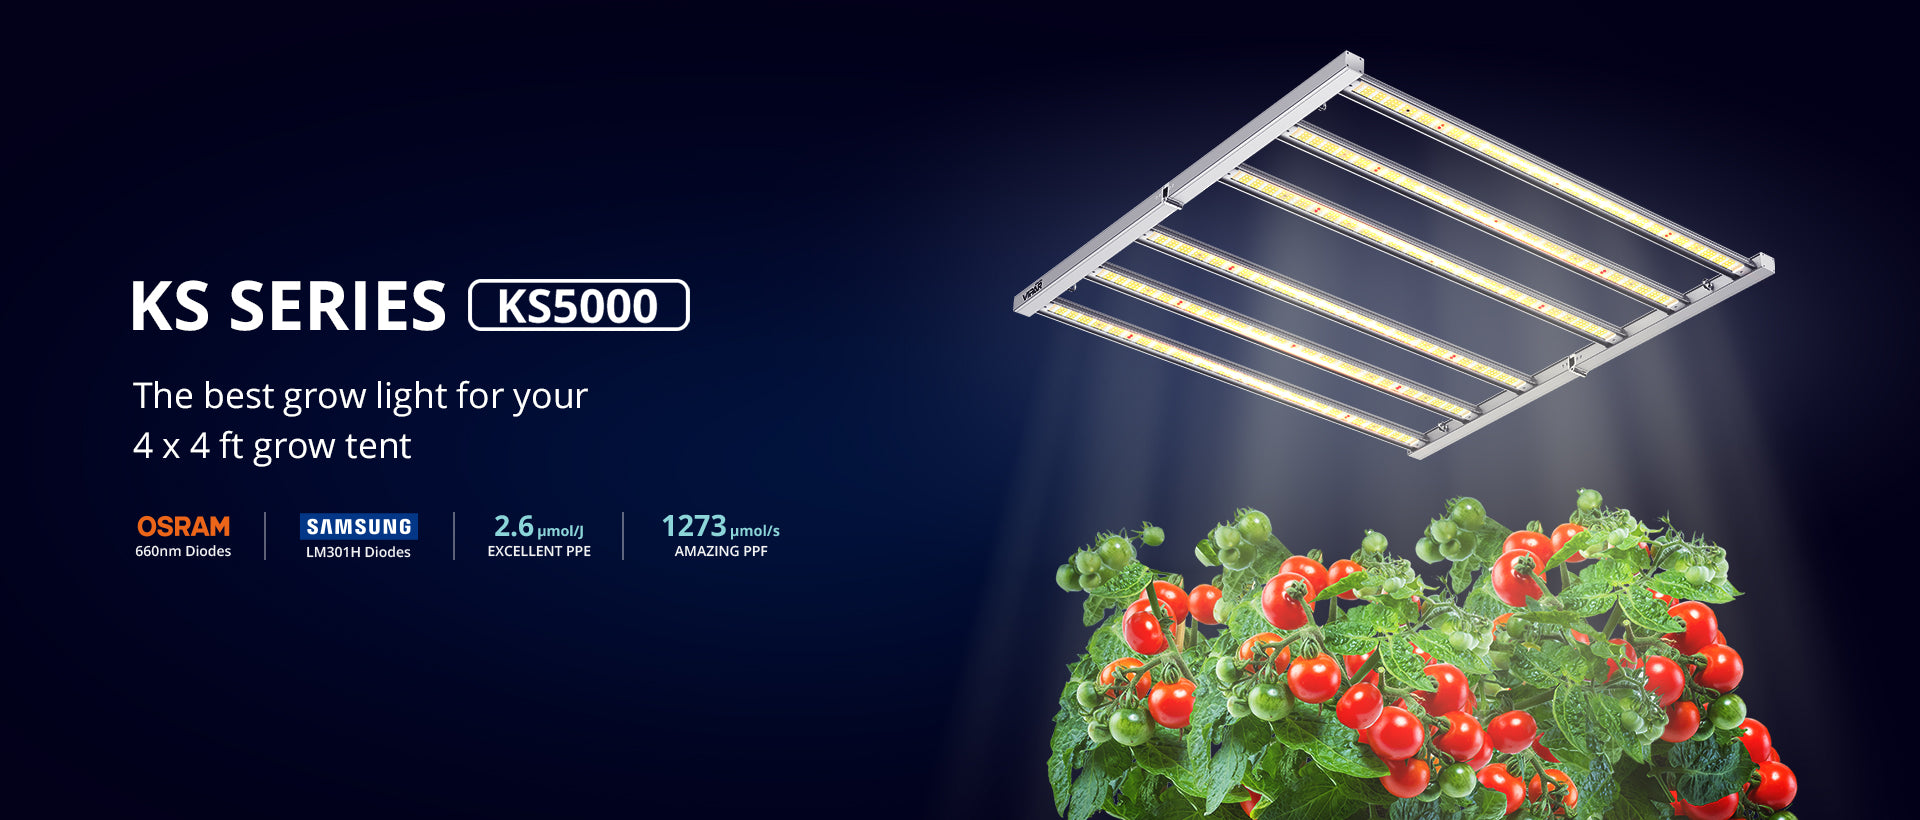 Viparspectra UK Official - Best Grow Lights in UK